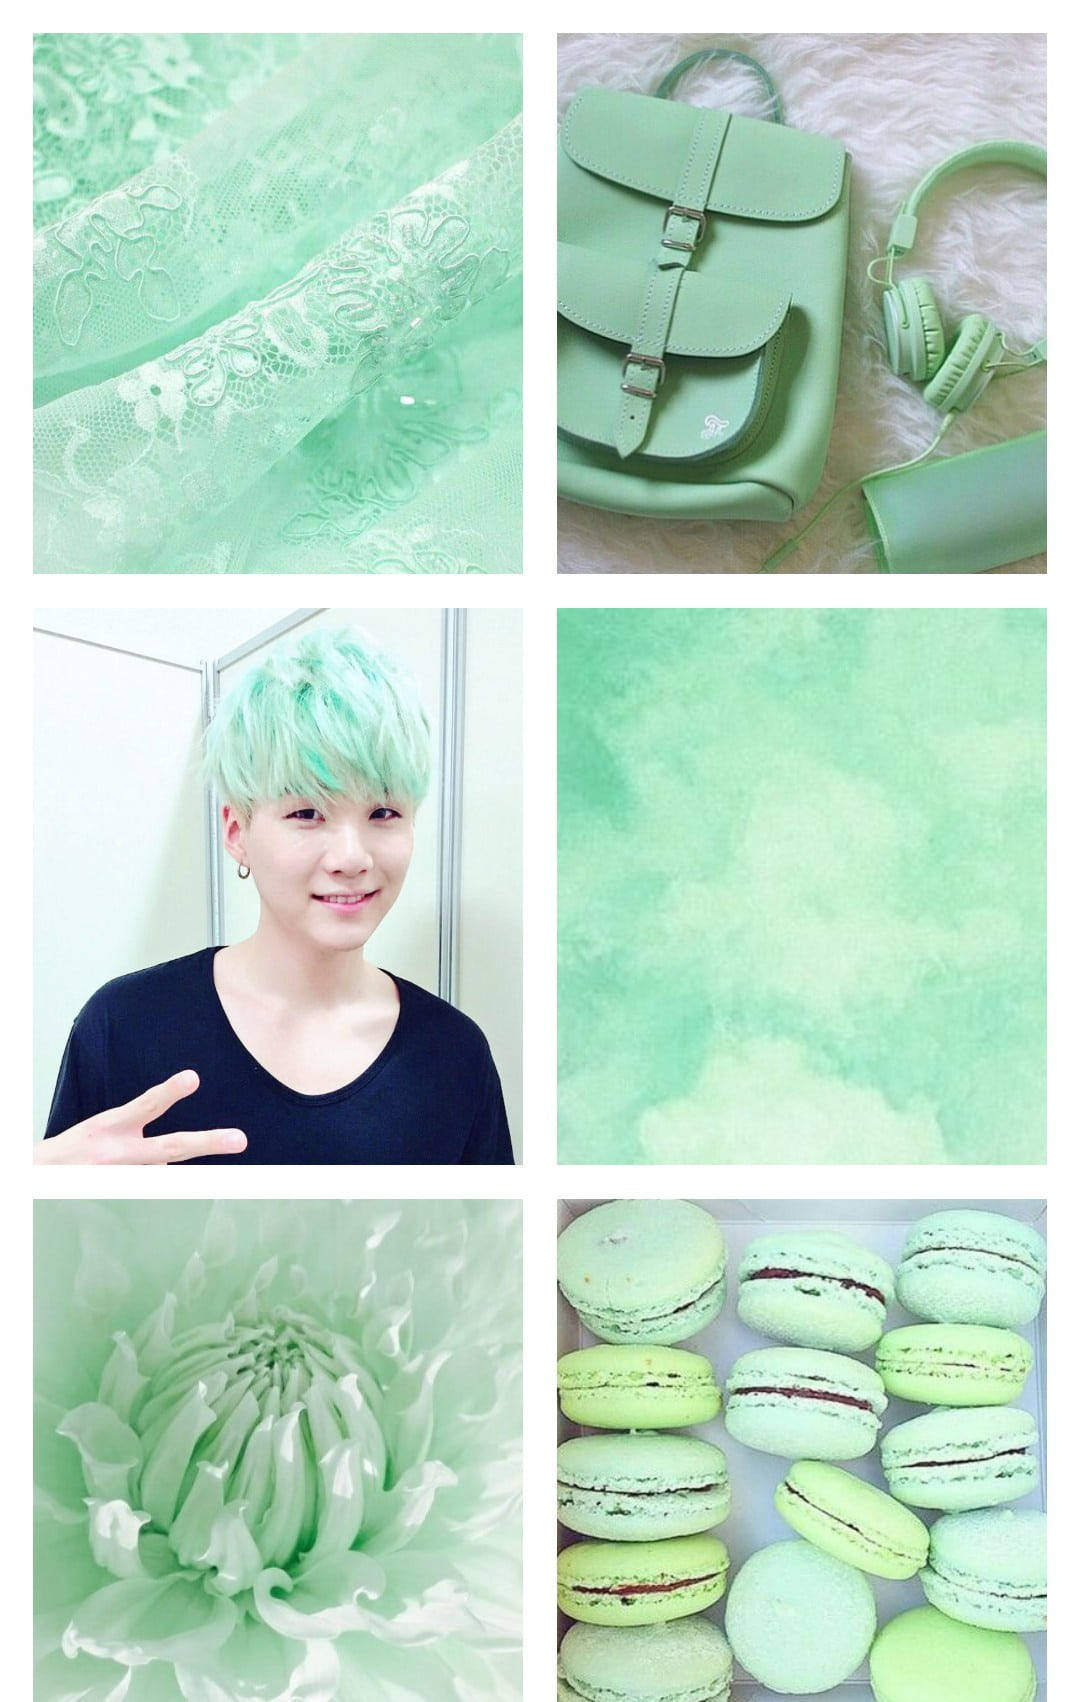 Download Suga With Super Light Green Hair Wallpaper | Wallpapers.com